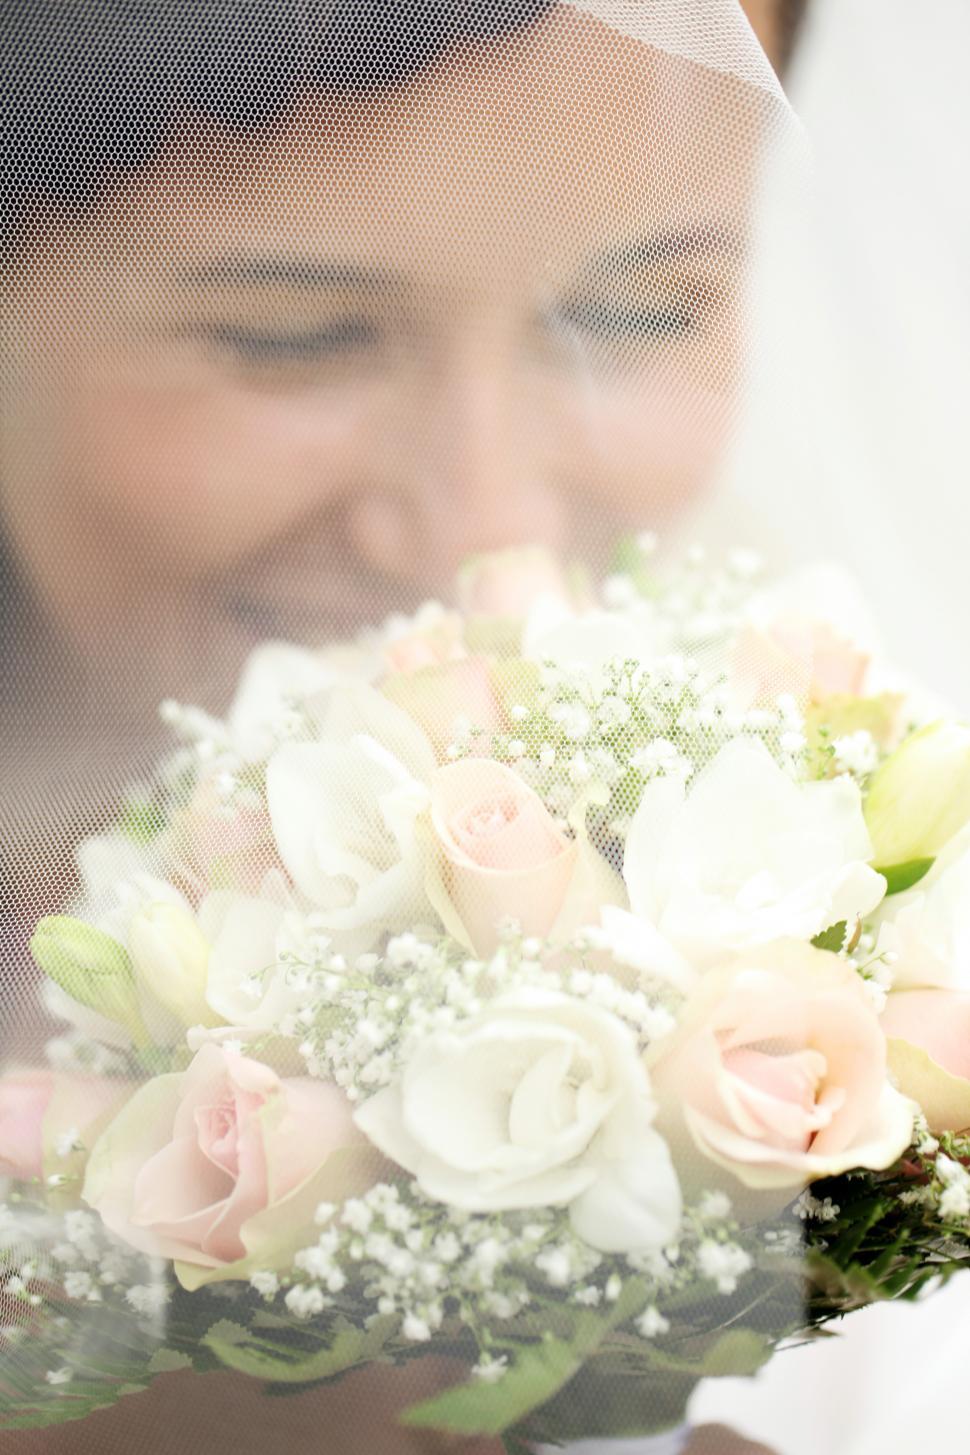 Free Image of Bride, Veil and Bouquet 